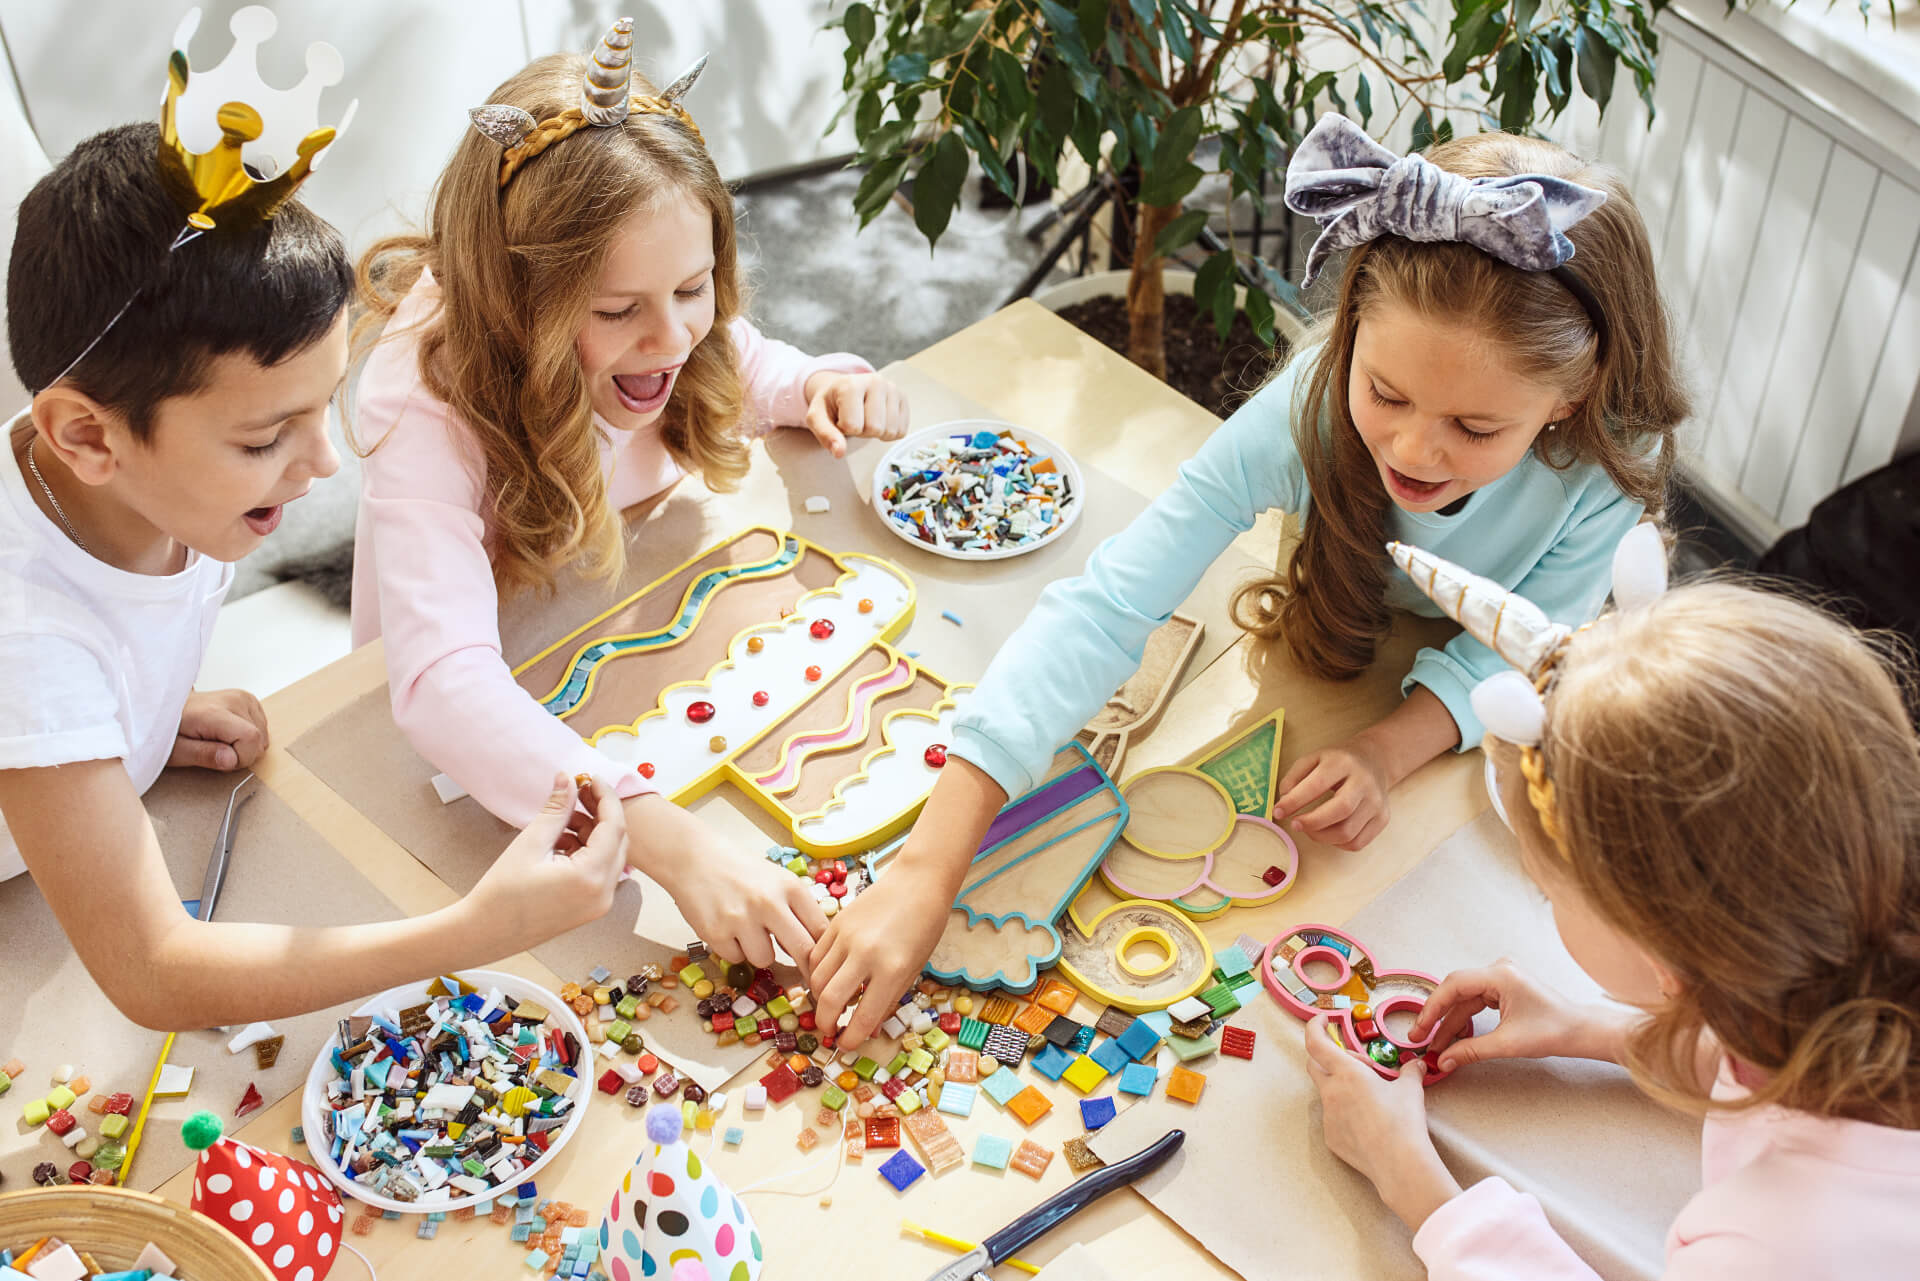 Looking for a unique venue for the next kids' birthday? Linz offers unforgettable experiences for your little ones.